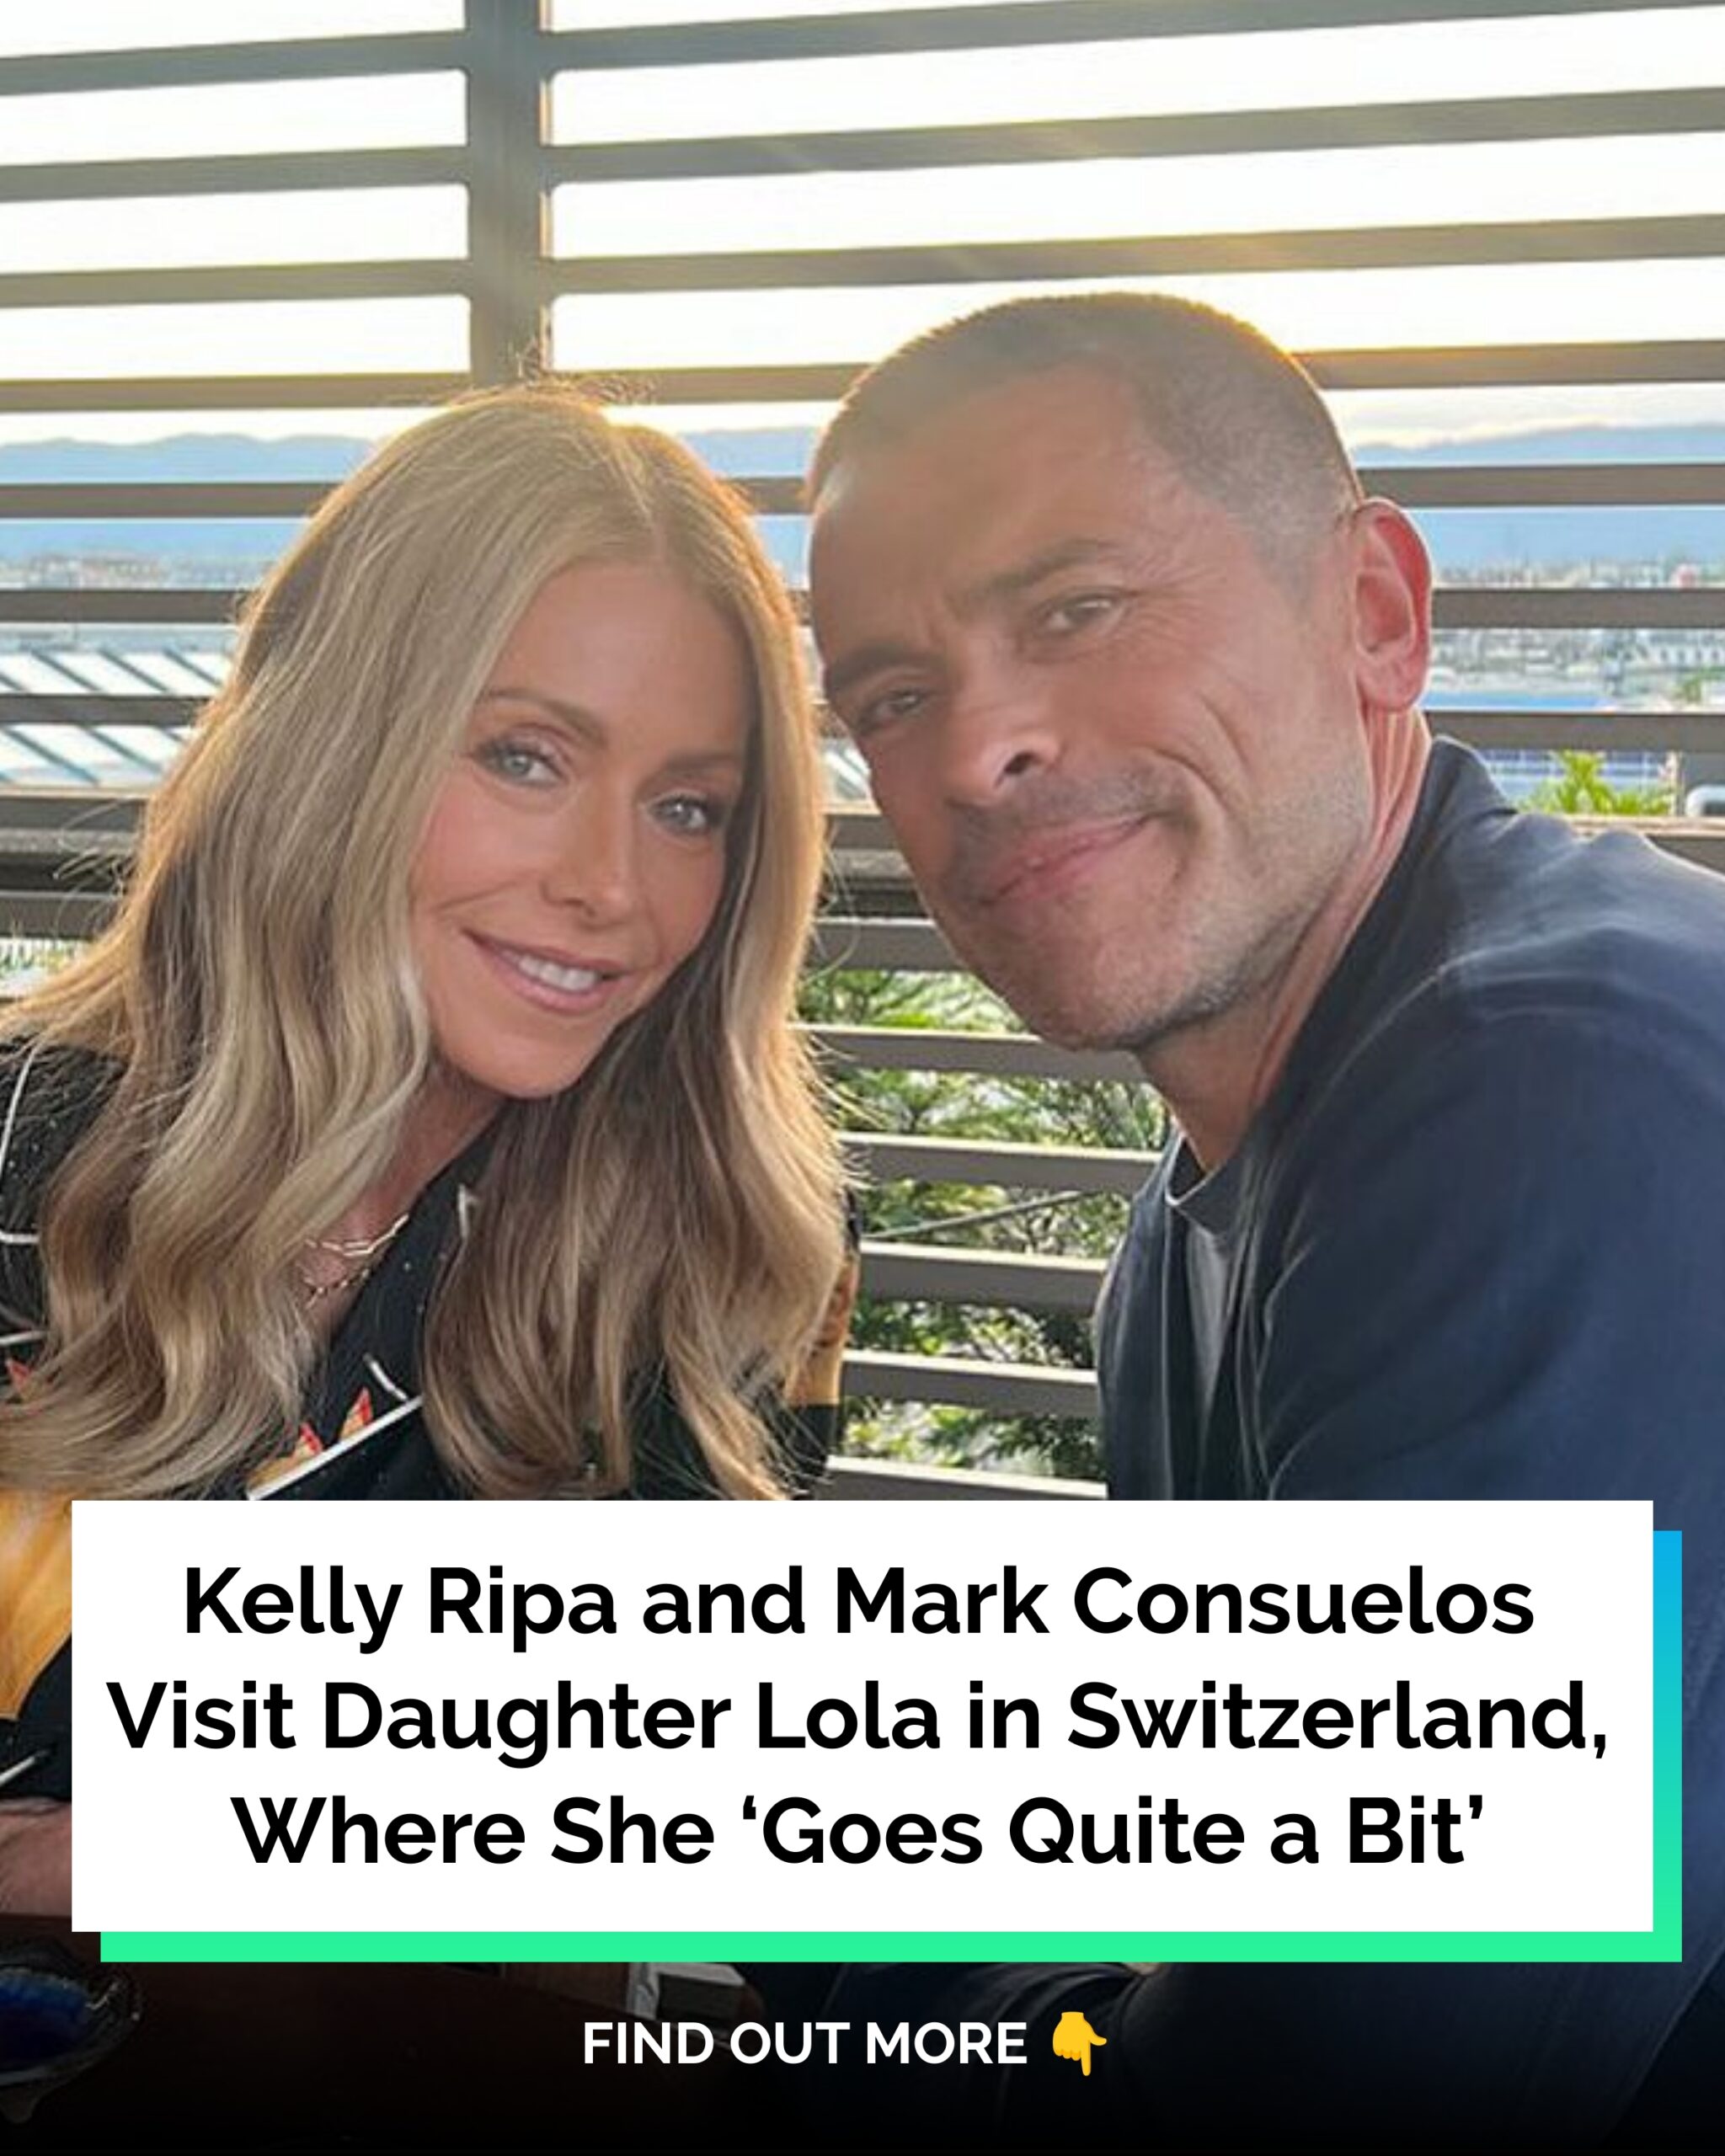 Kelly Ripa and Mark Consuelos Visit Daughter Lola in Switzerland, Where She ‘Goes Quite a Bit’